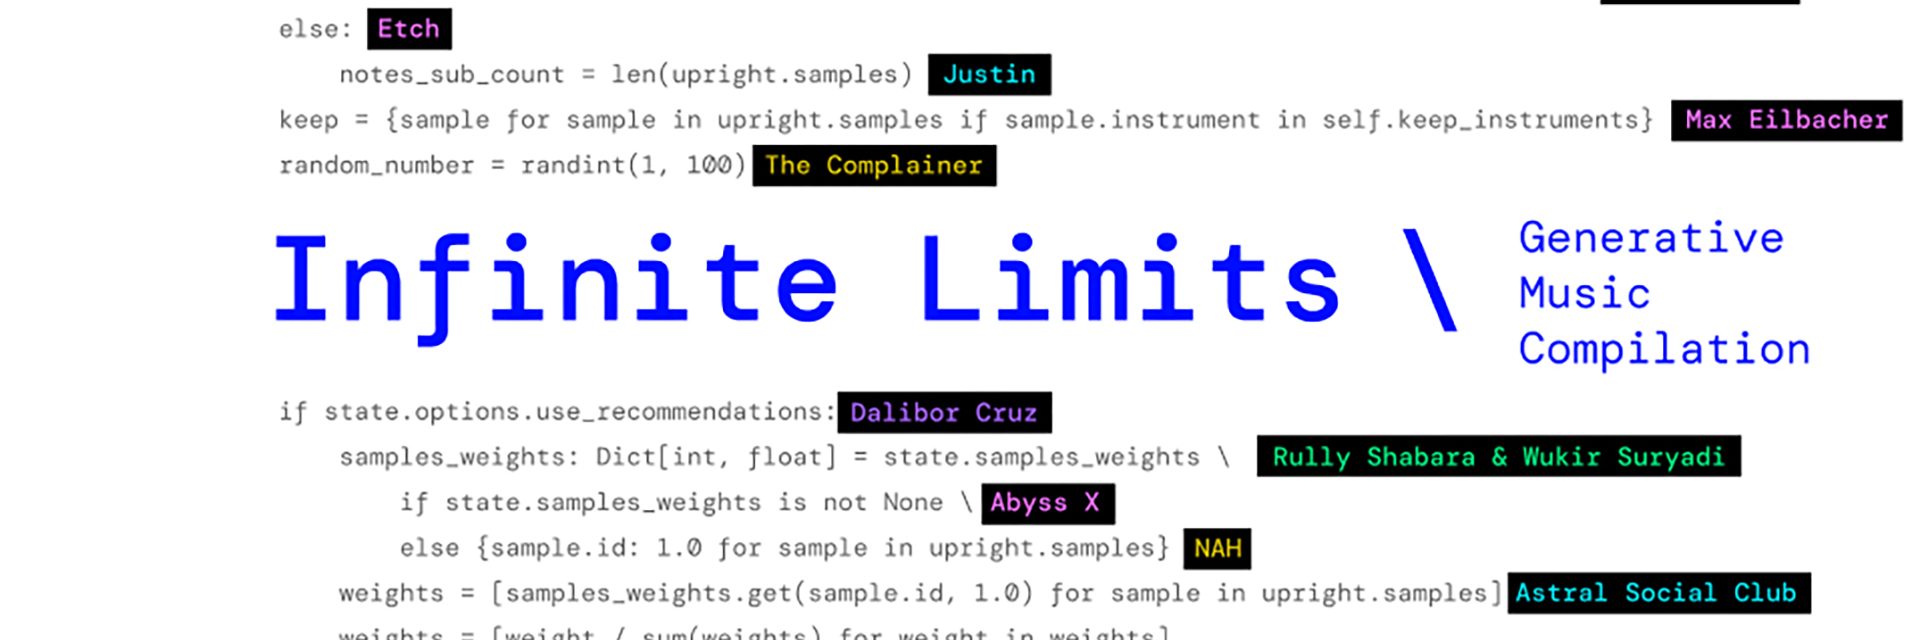 Mubert Releases AI-Generated Album Titled  “Infinite Limits” in Collaboration with 27 Artists — Mubert Blog